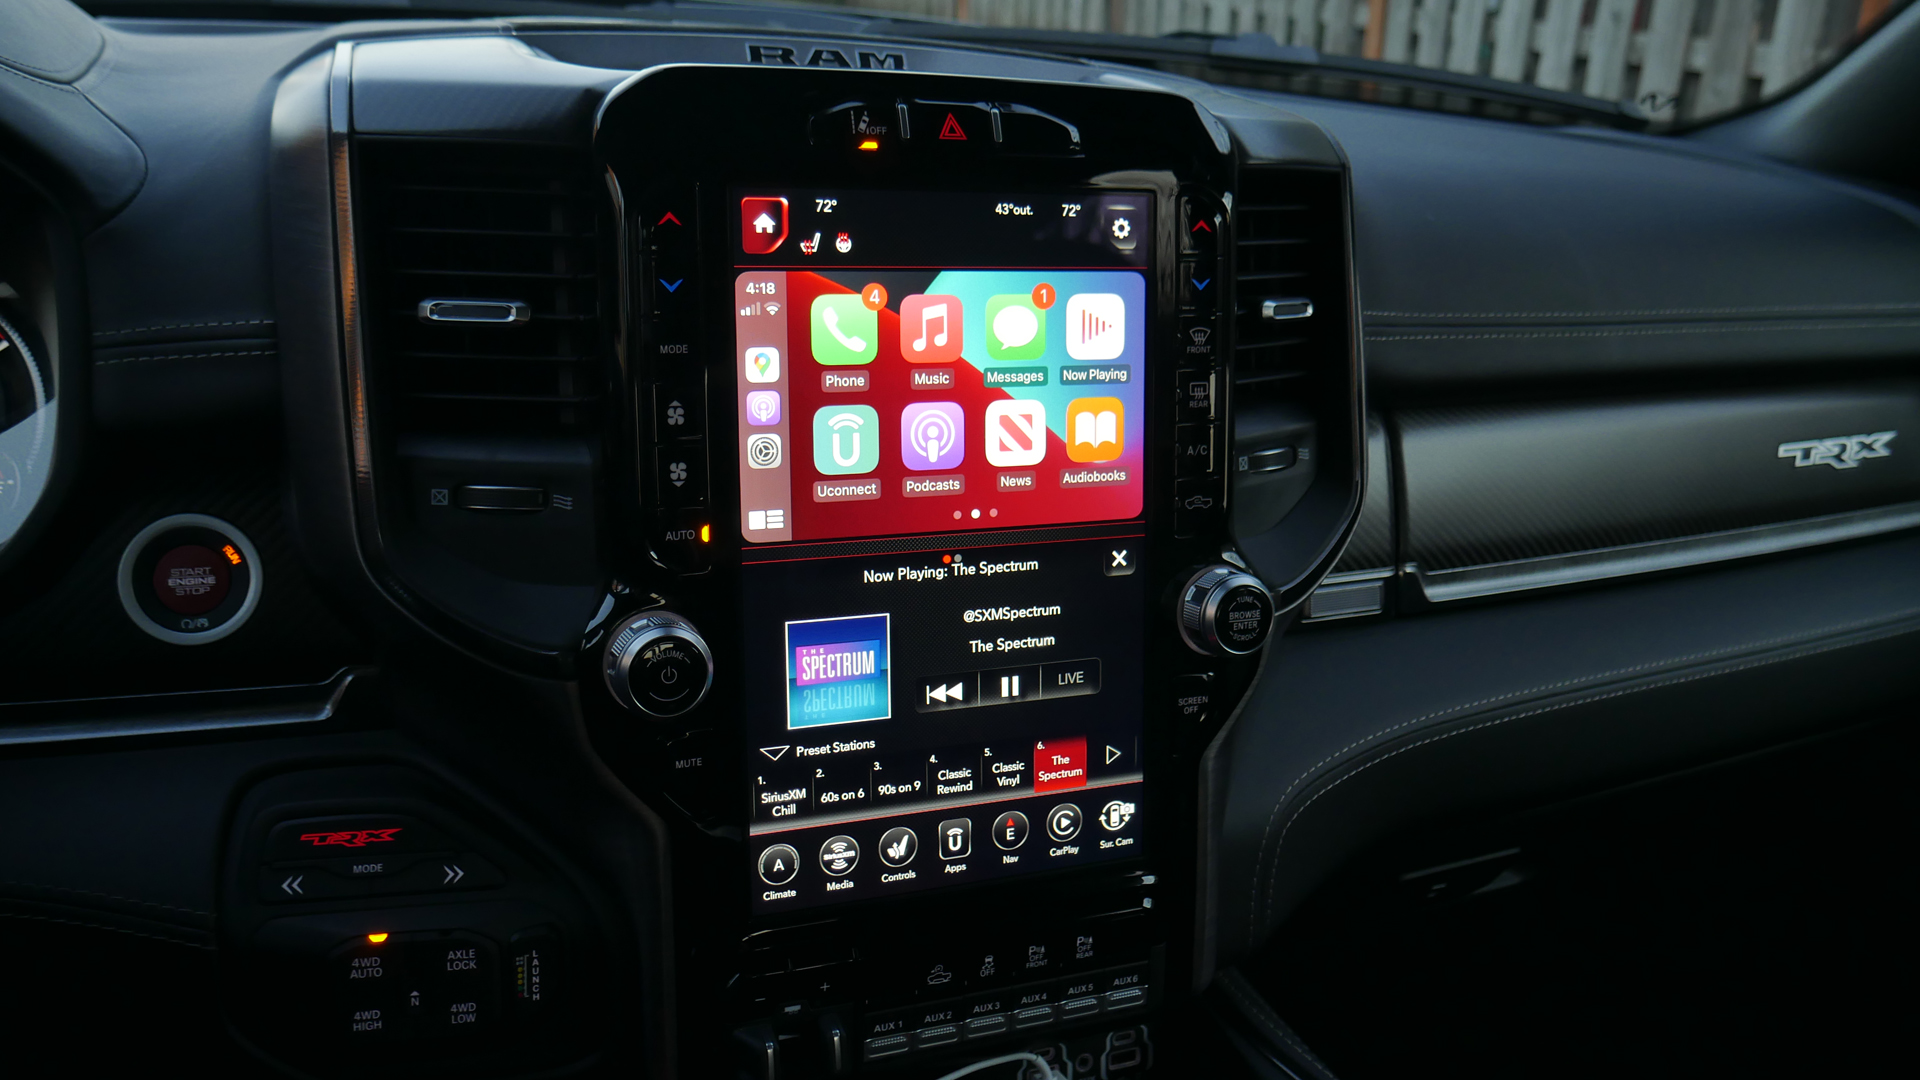 Ram 1500 Uconnect Infotainment System Review